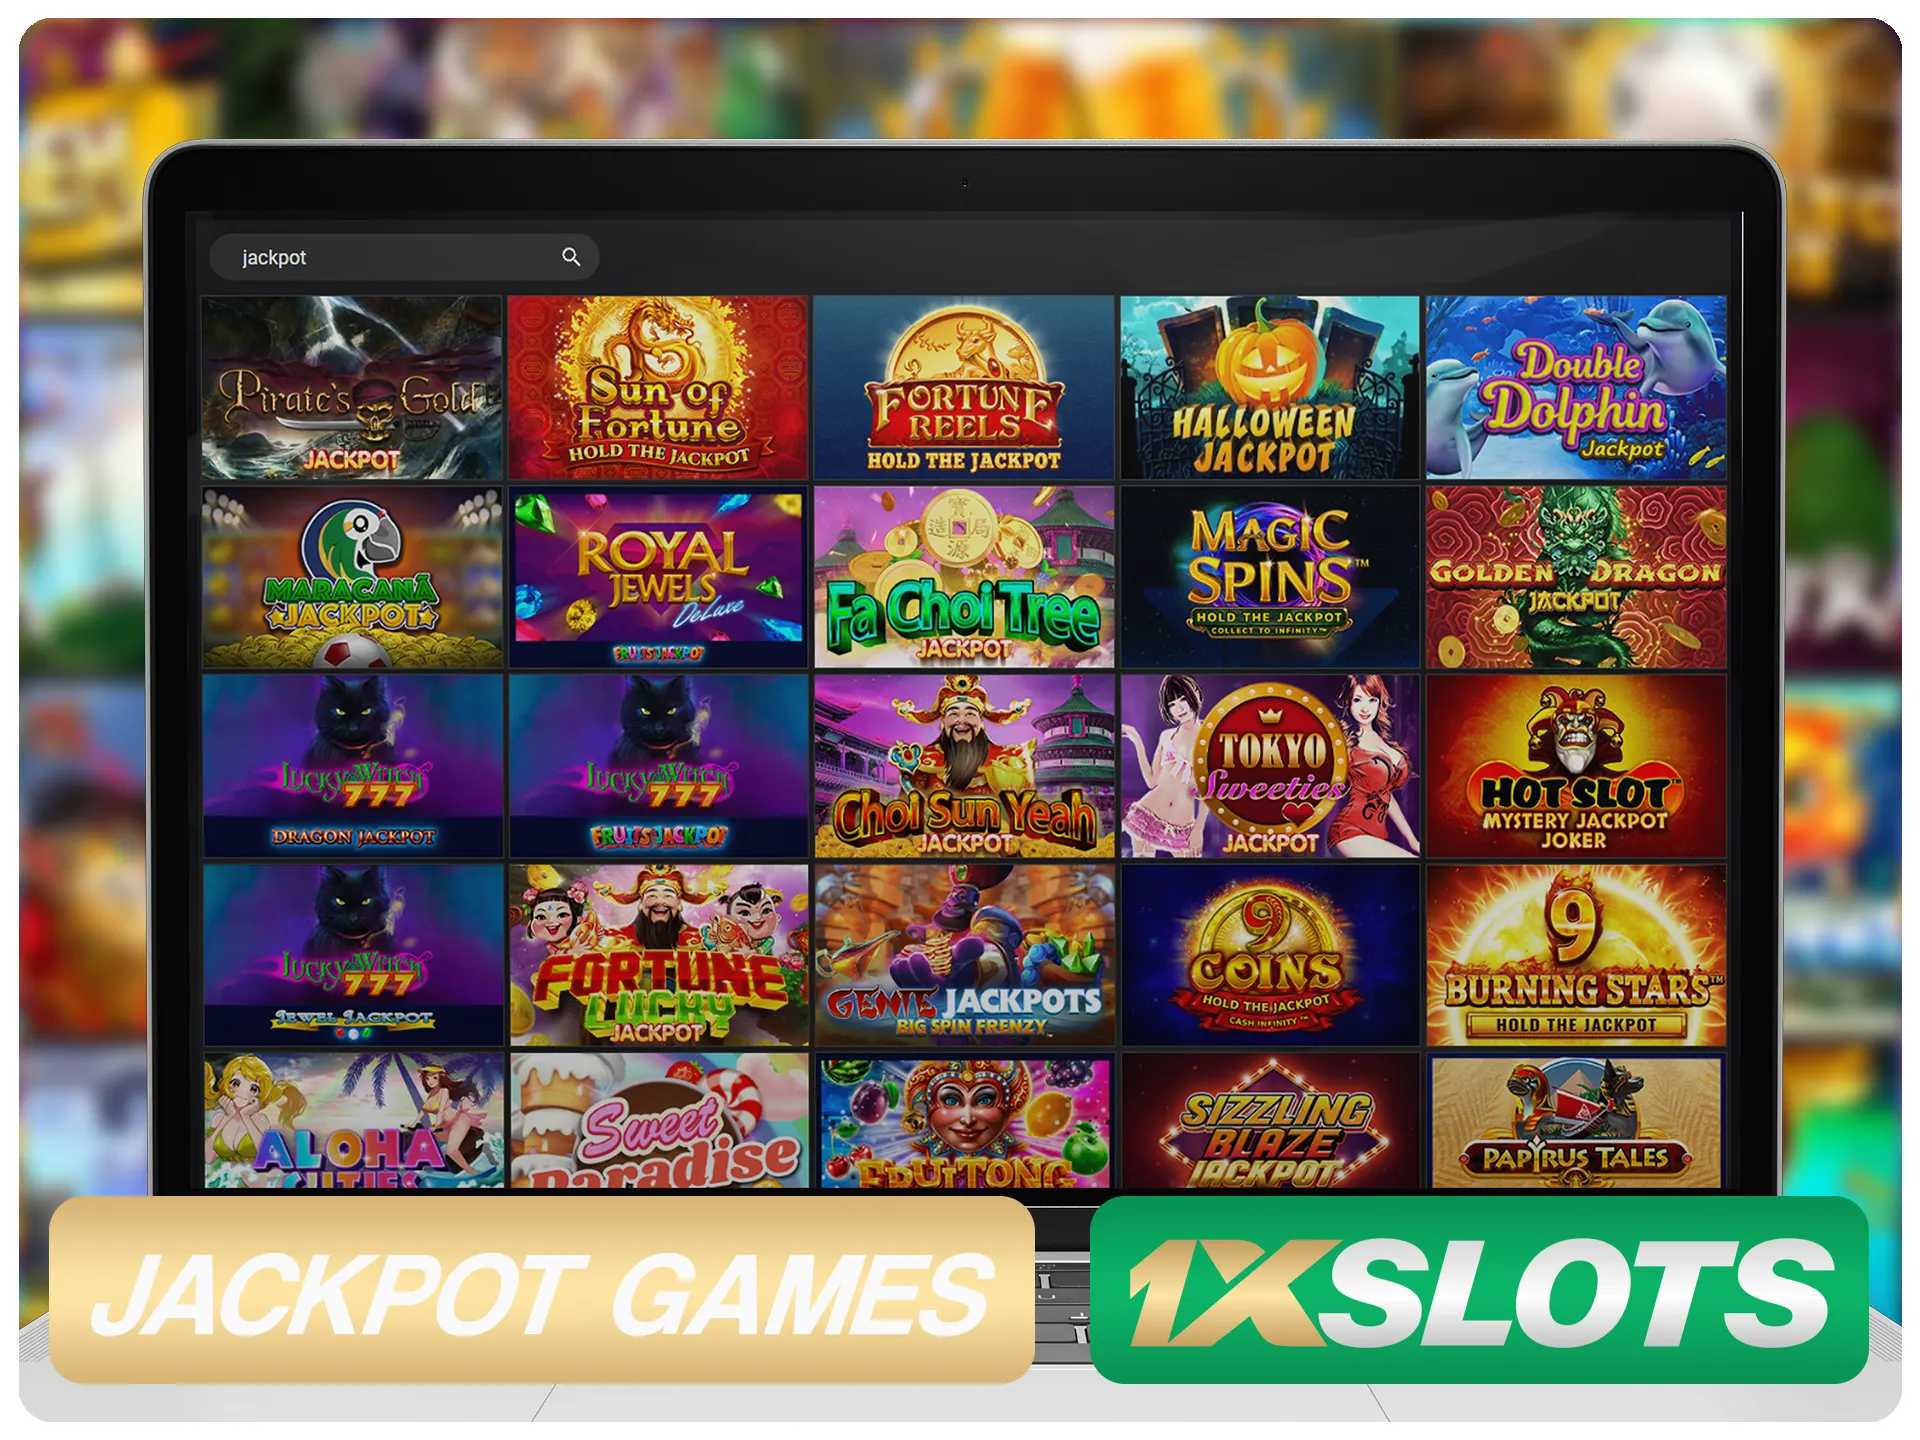 Play jackpot games and win all of the 1xSlots money.